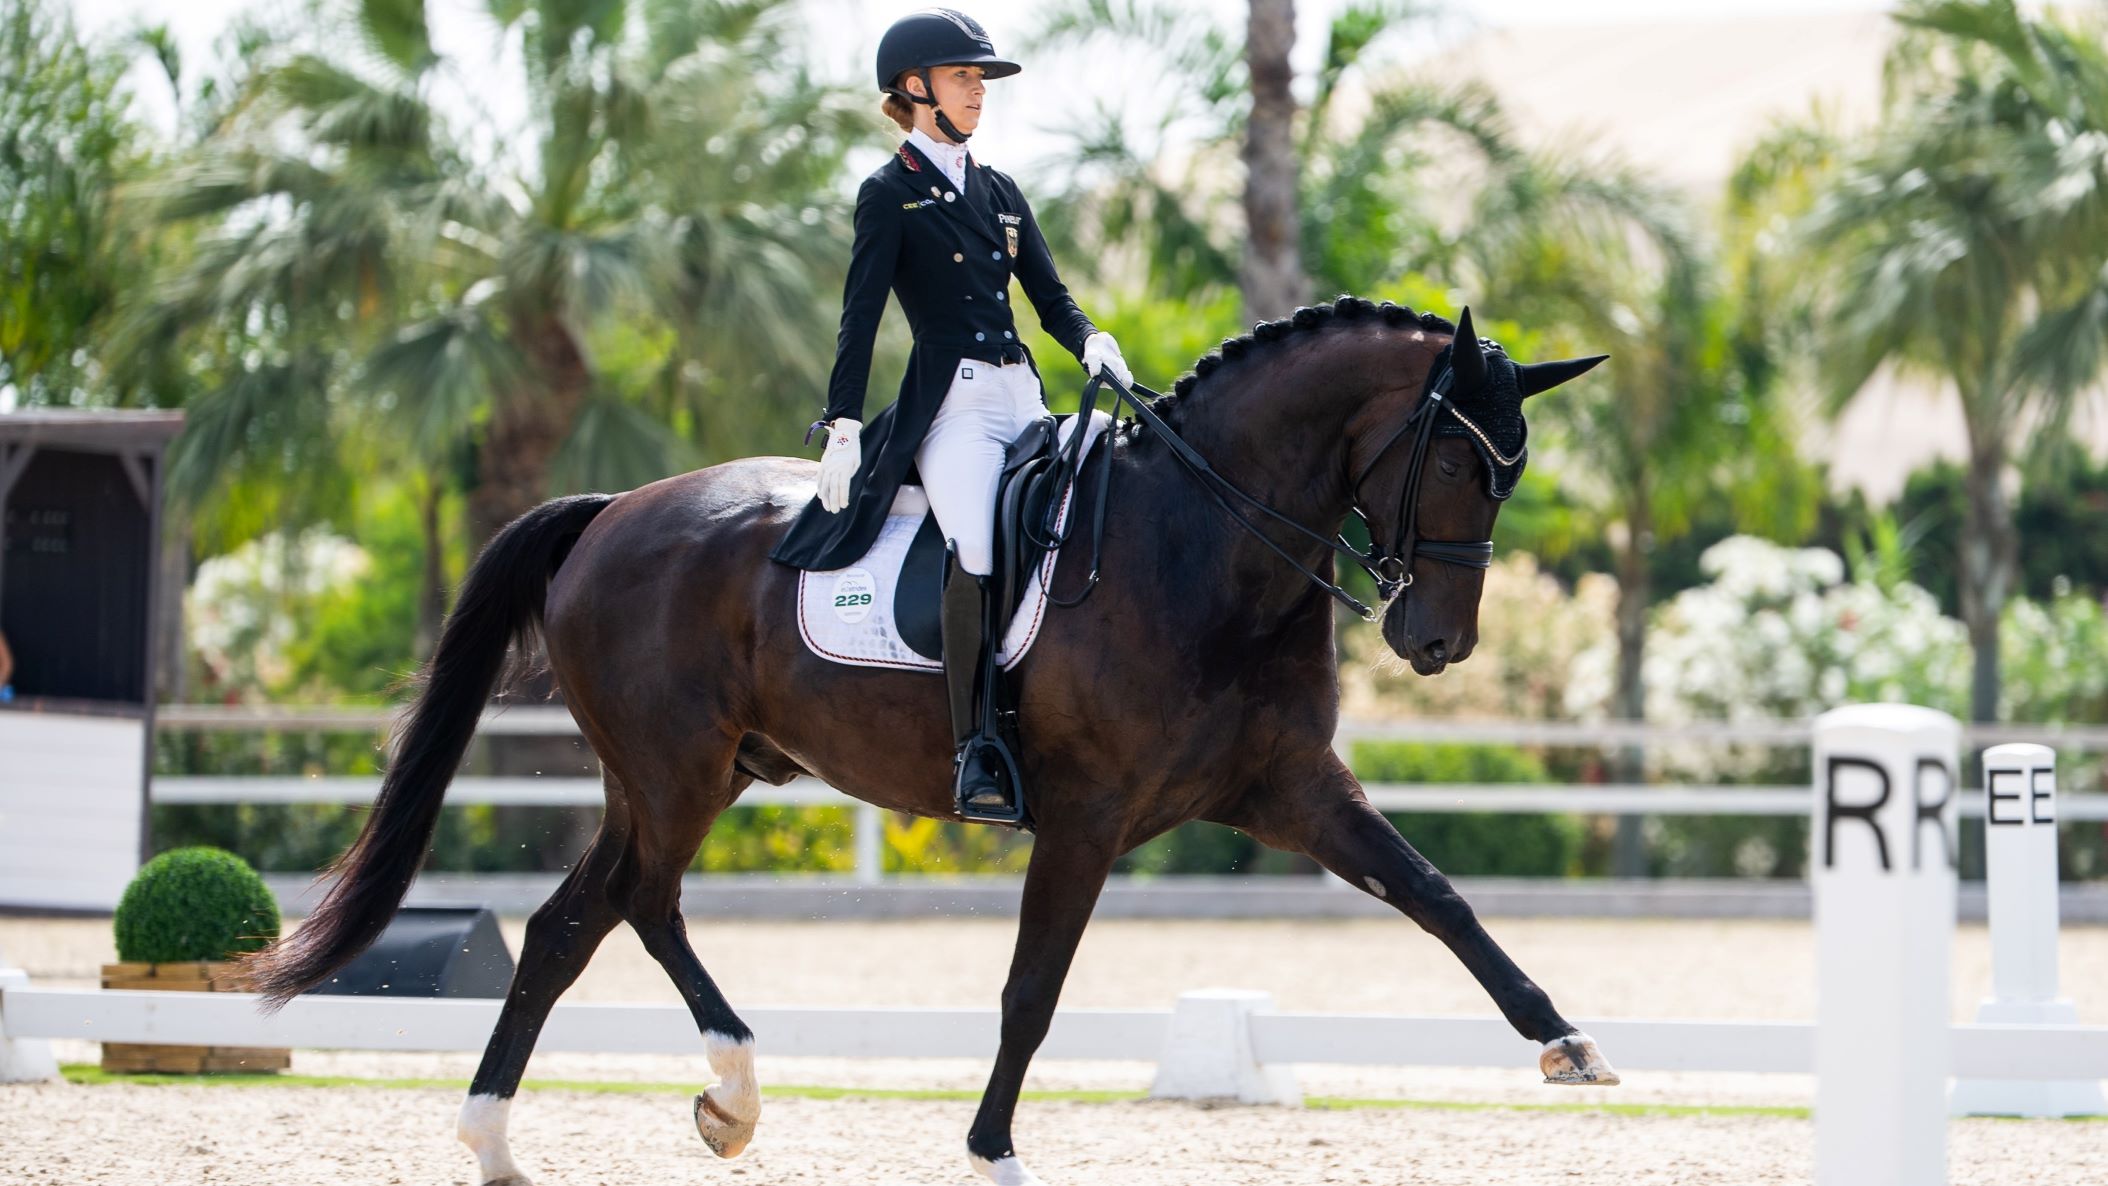 A dark brown show horse in a competition.